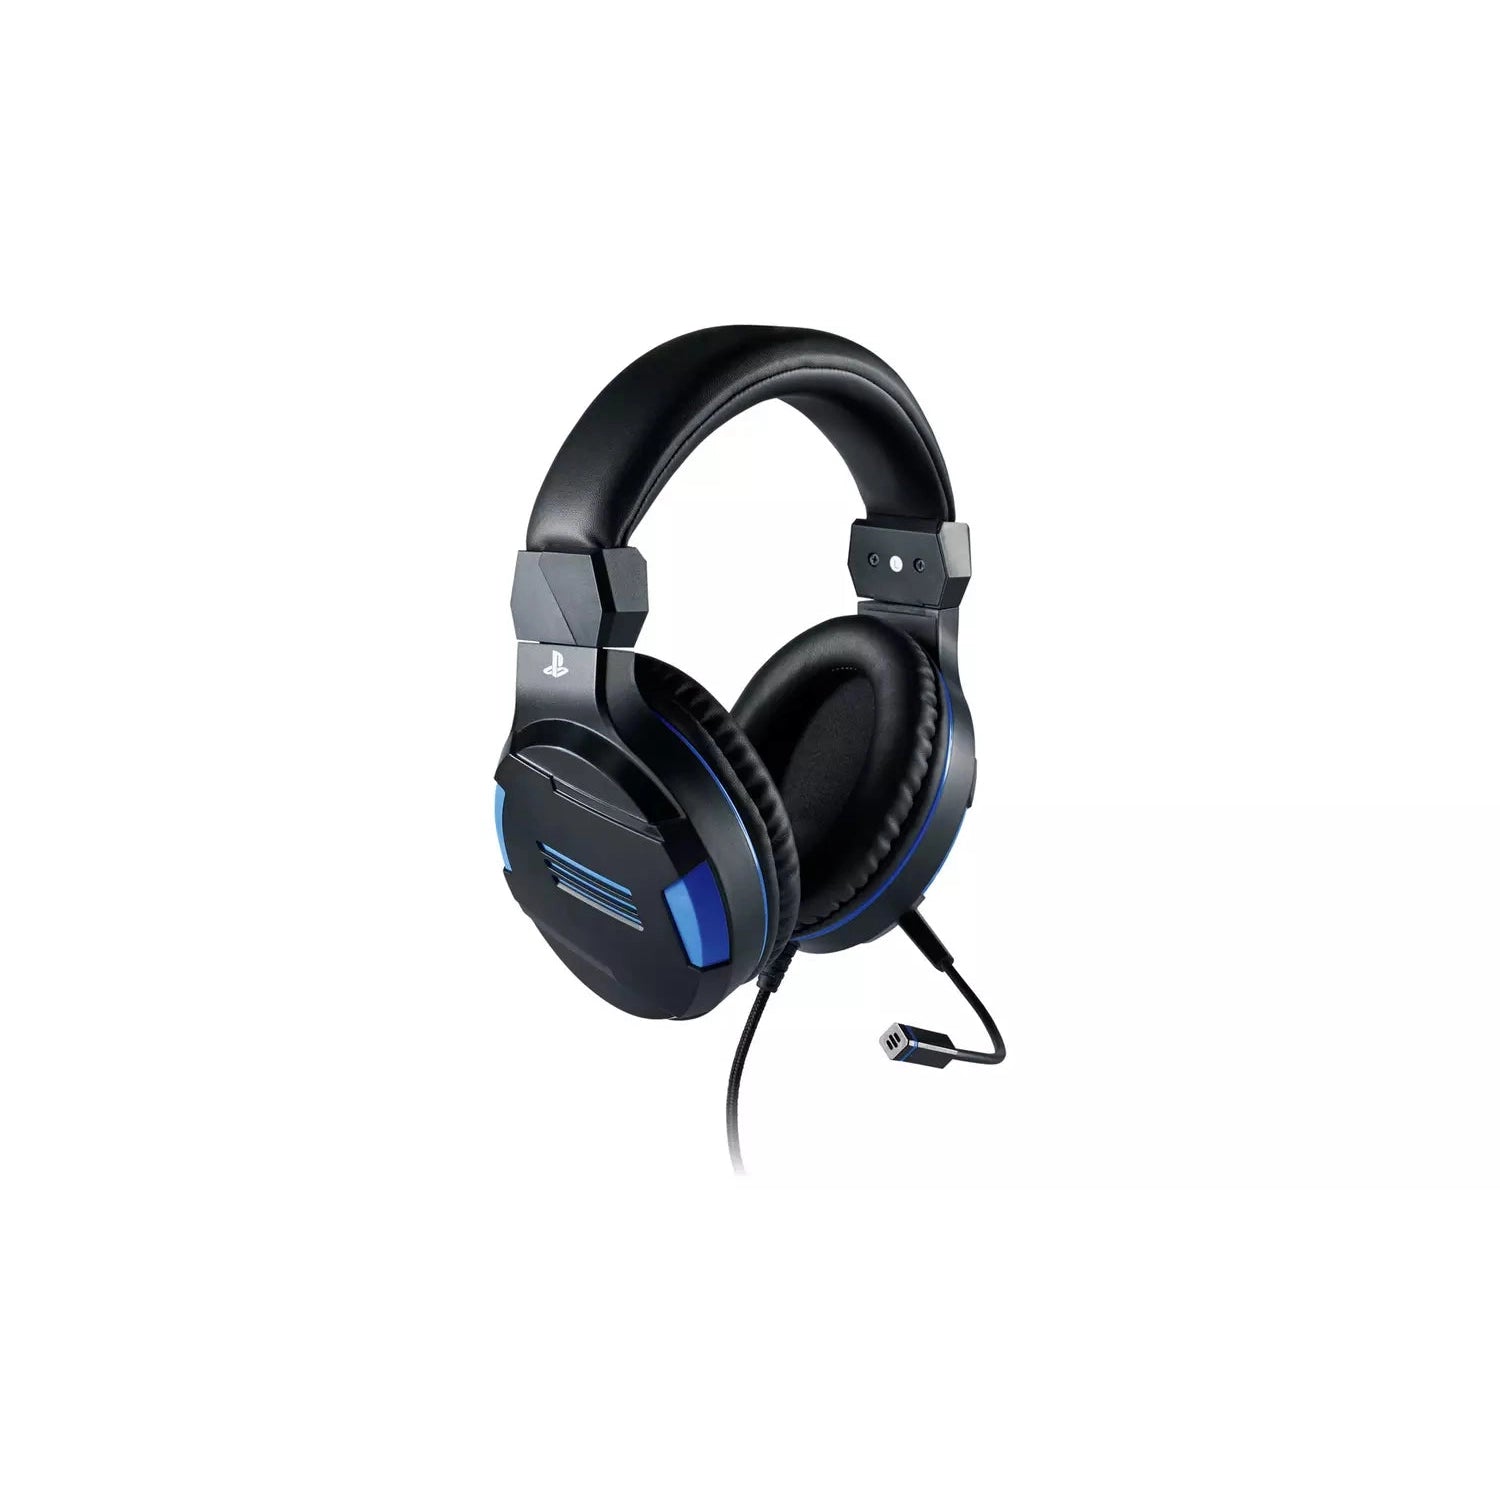 BigBen Stereo Gaming Headset for PS4